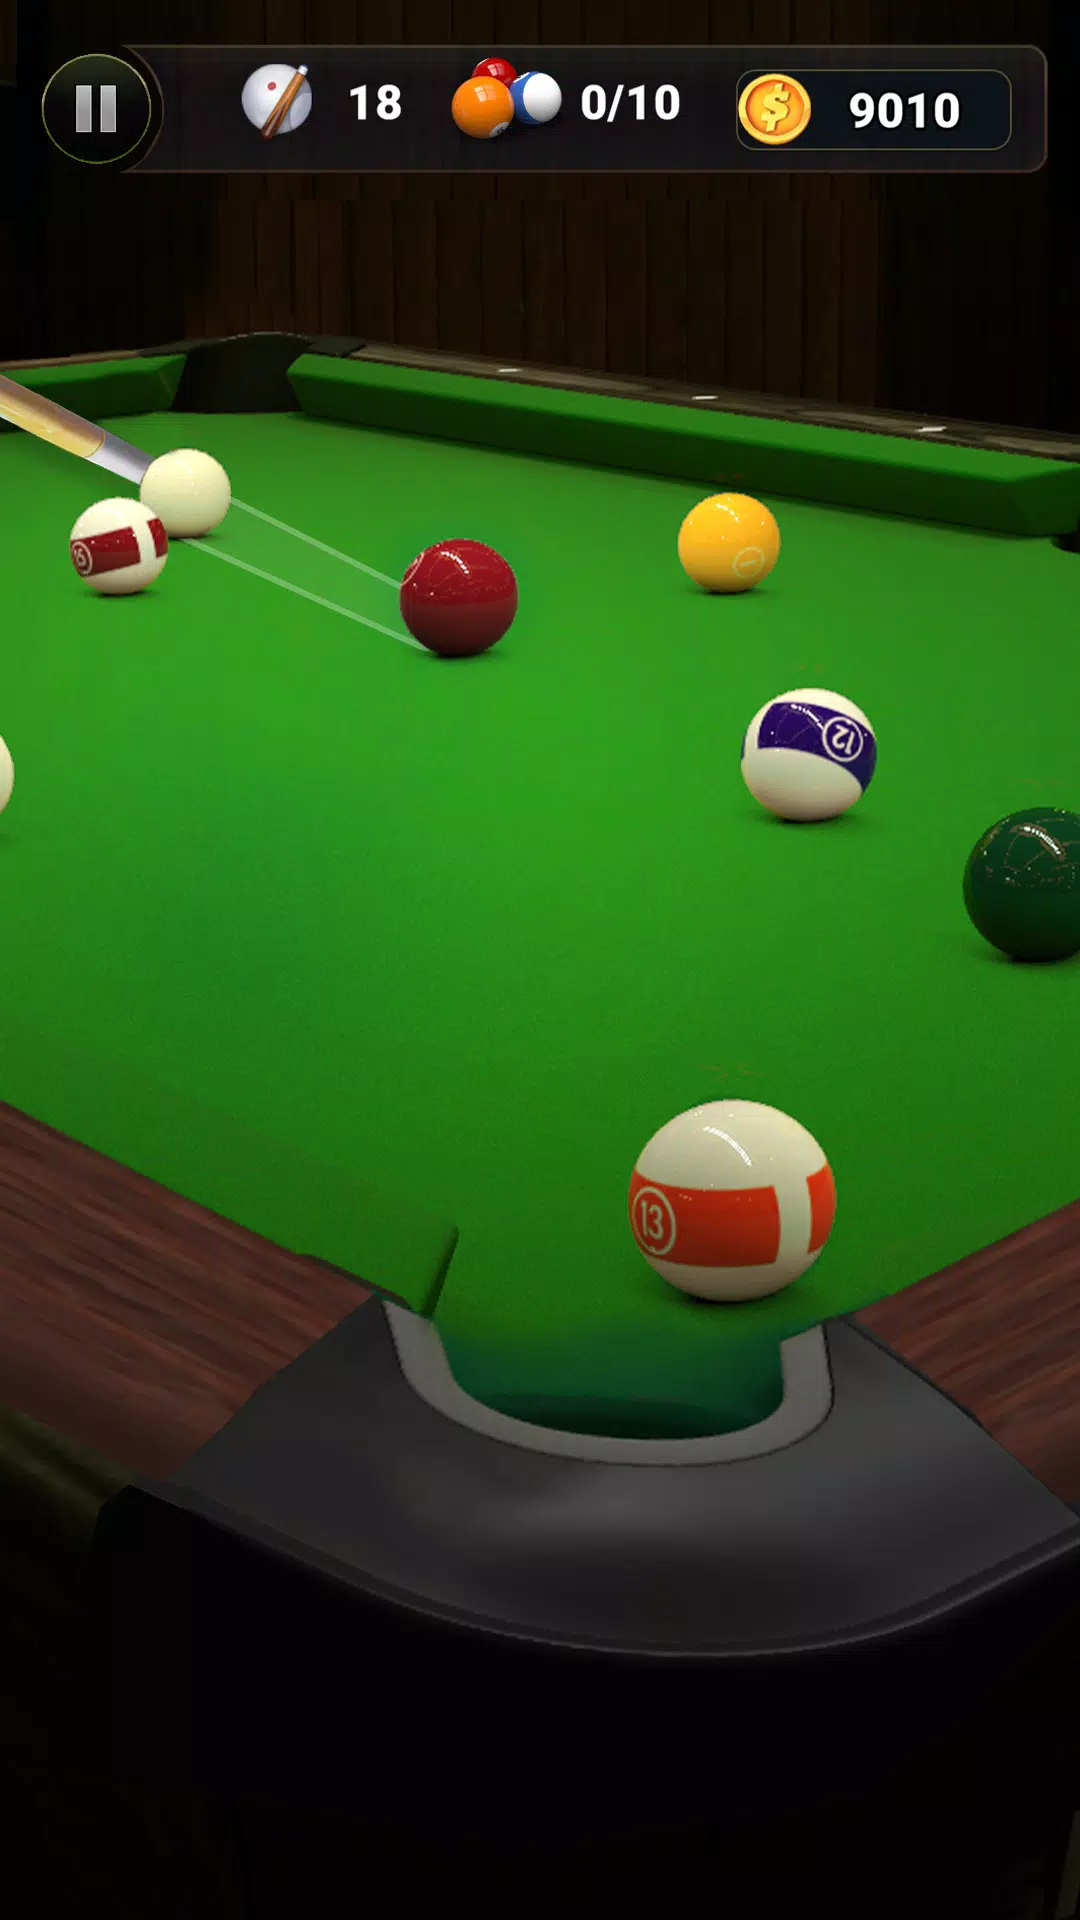 8 Ball Pool 3.12.4 (1309) APK Download - AndroidAPKsFree